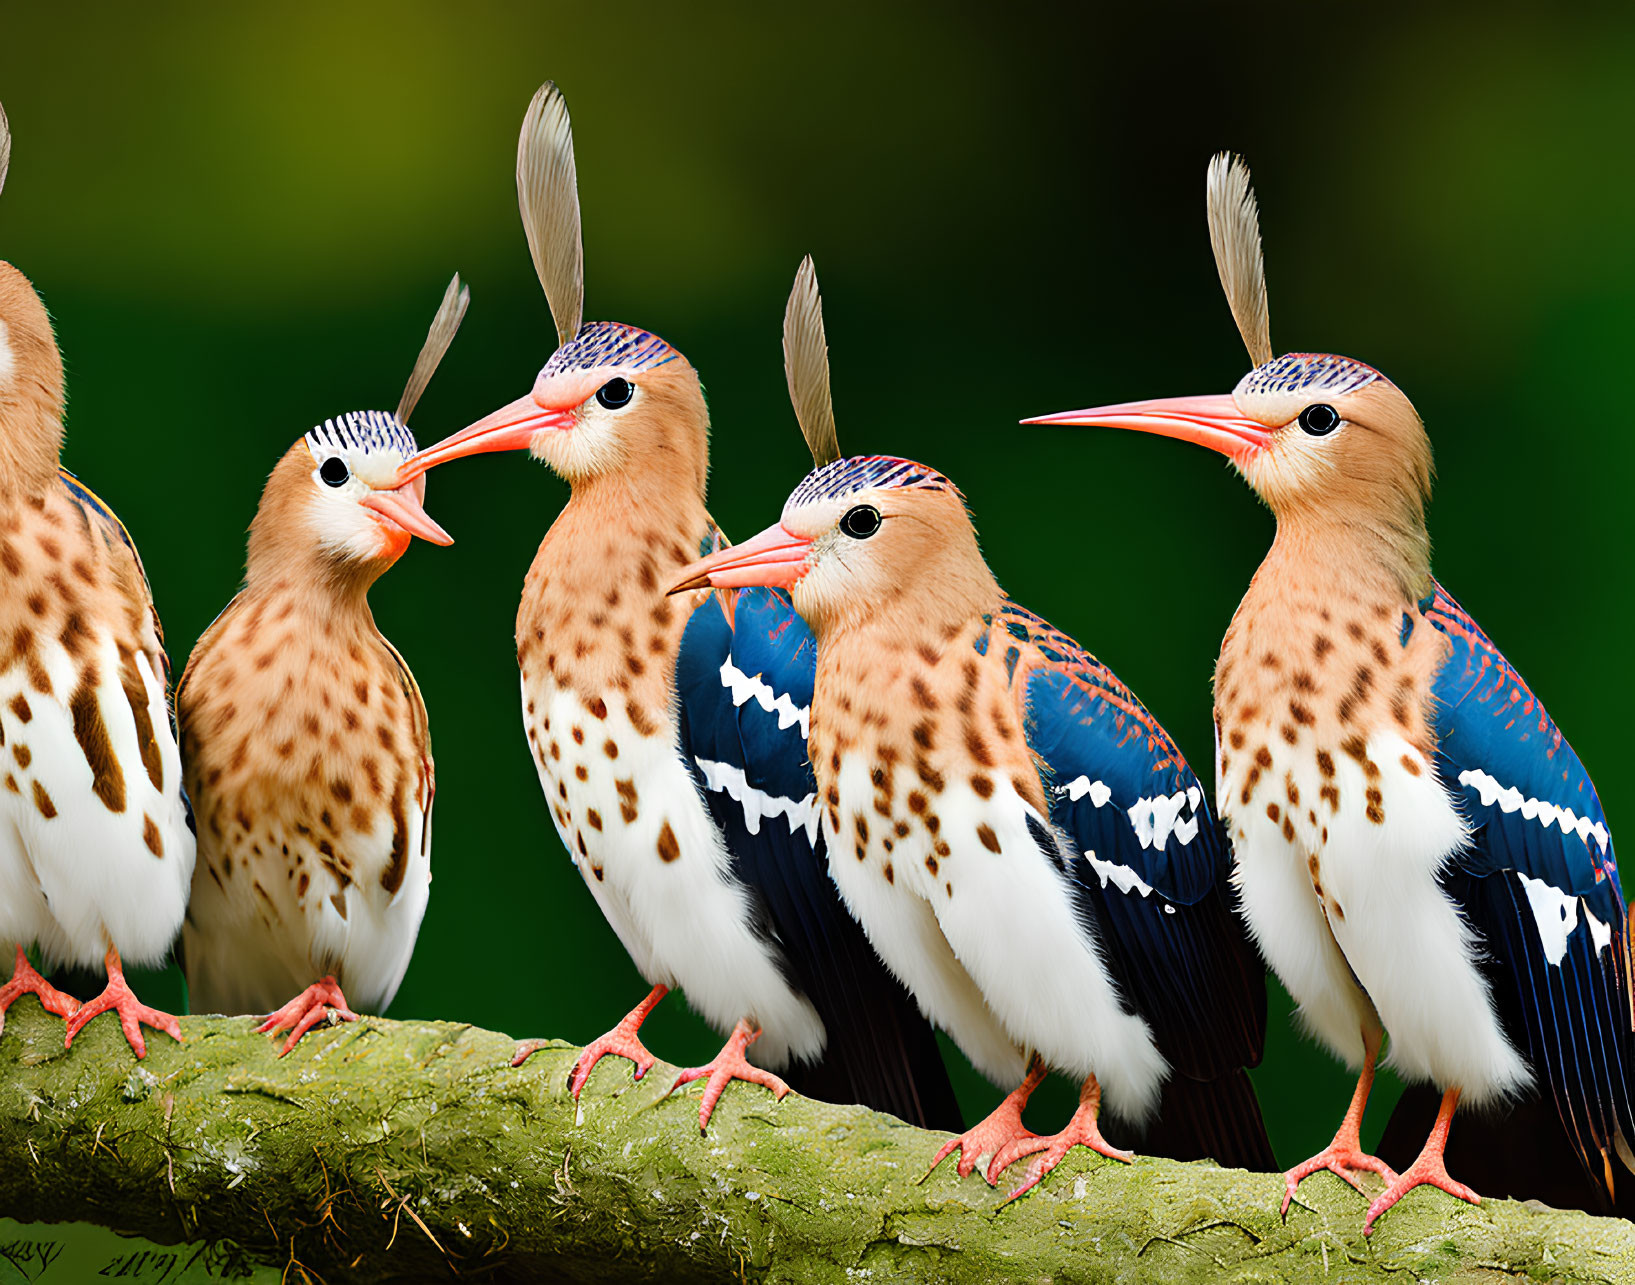 Five birds with spotted brown plumage and long orange beaks perched on a branch against a green